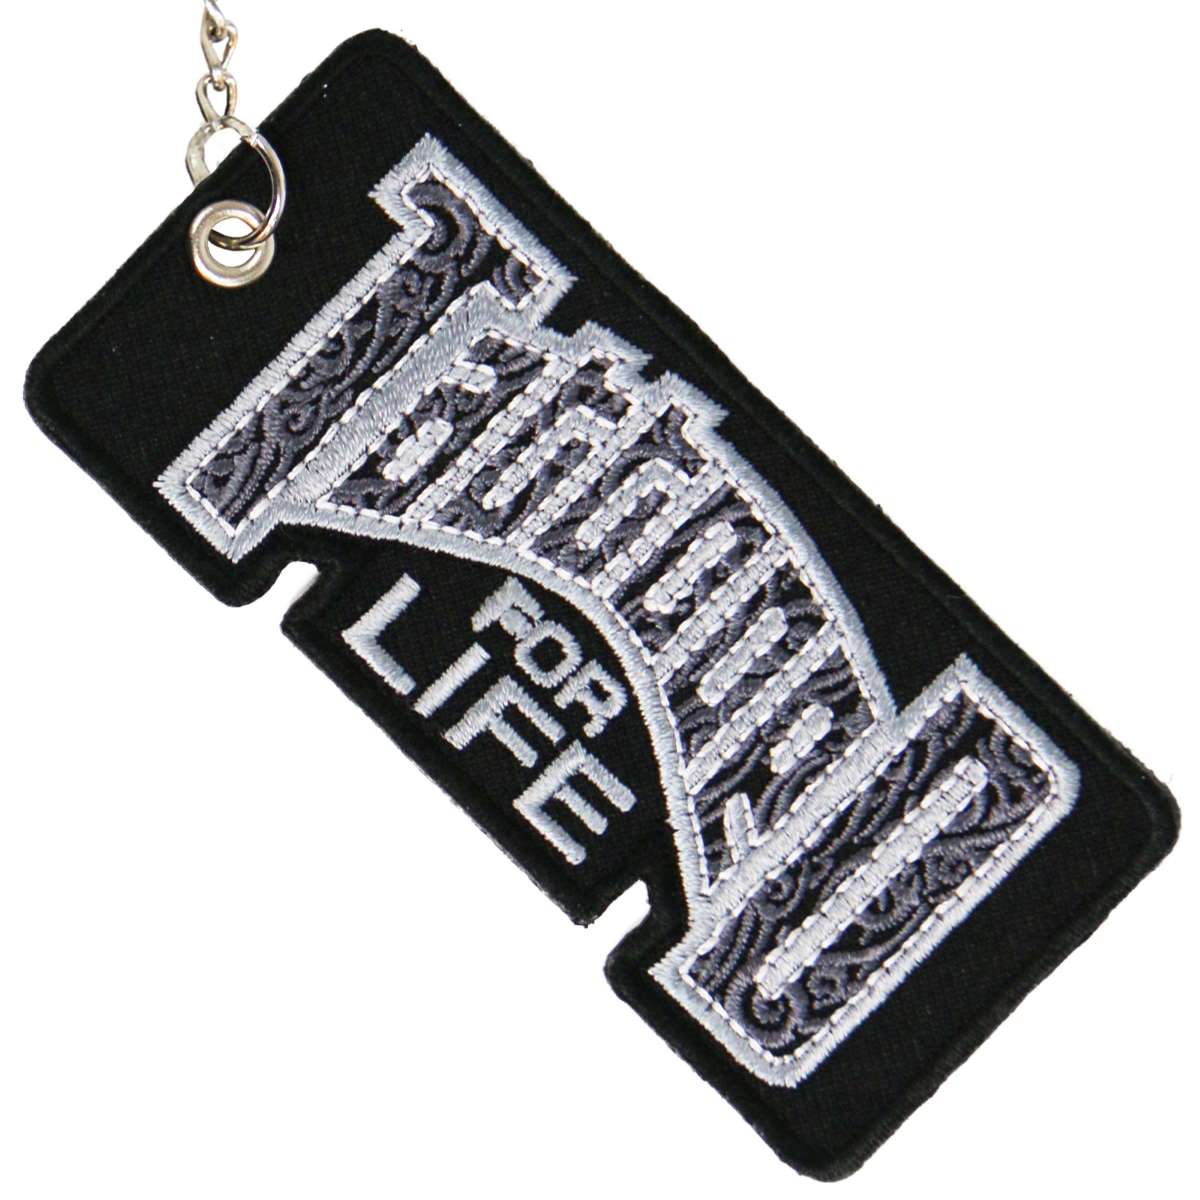 Hot Leathers Tattooed For Life Embroidered Key Chain KCH1042